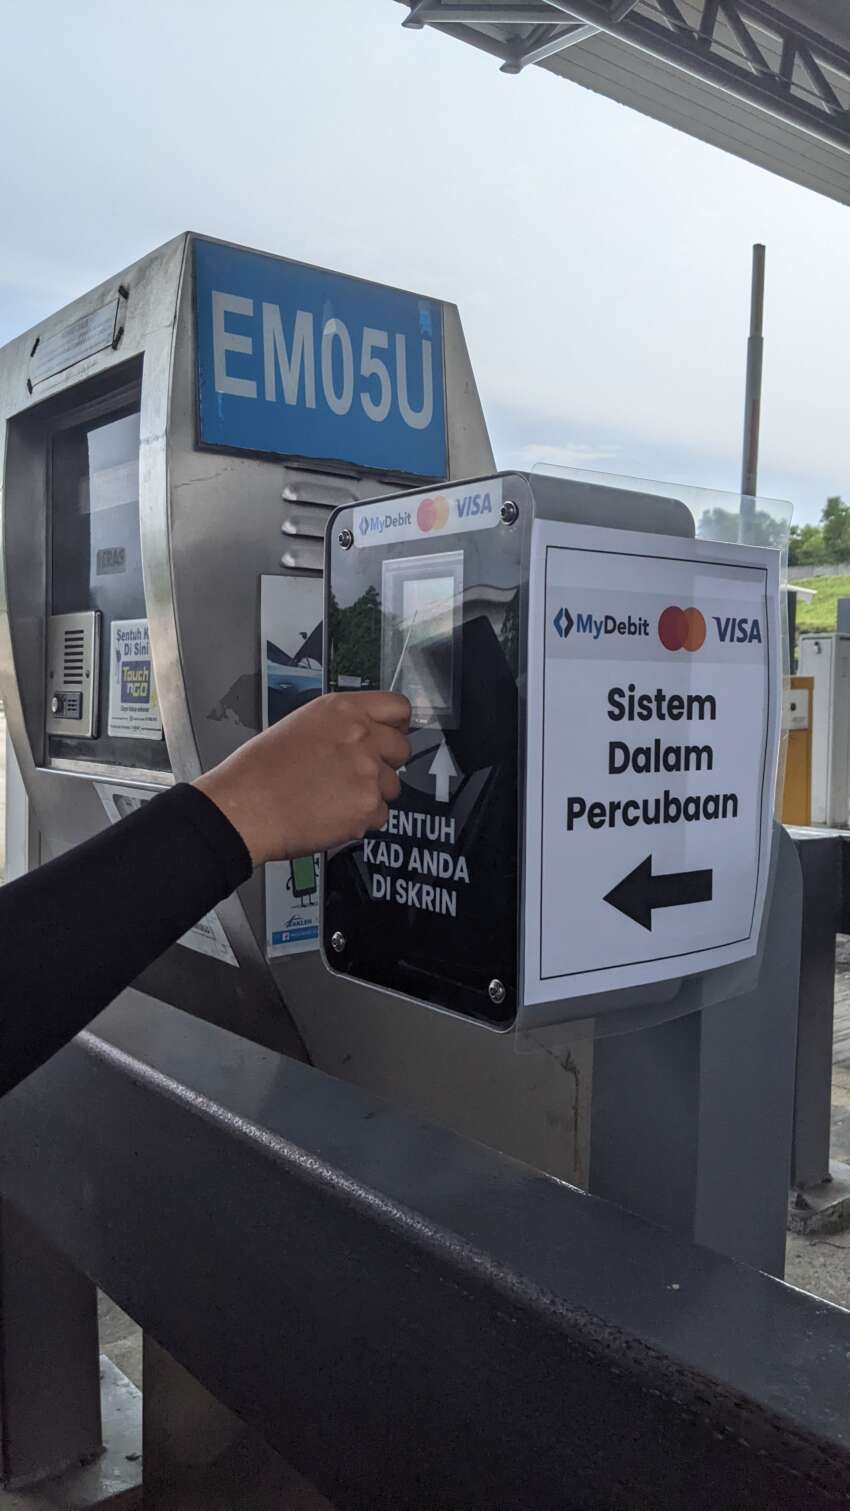 GCE, AKLEH highways testing open toll payment – users can pay toll fare with prepaid, credit, debit cards 1667965